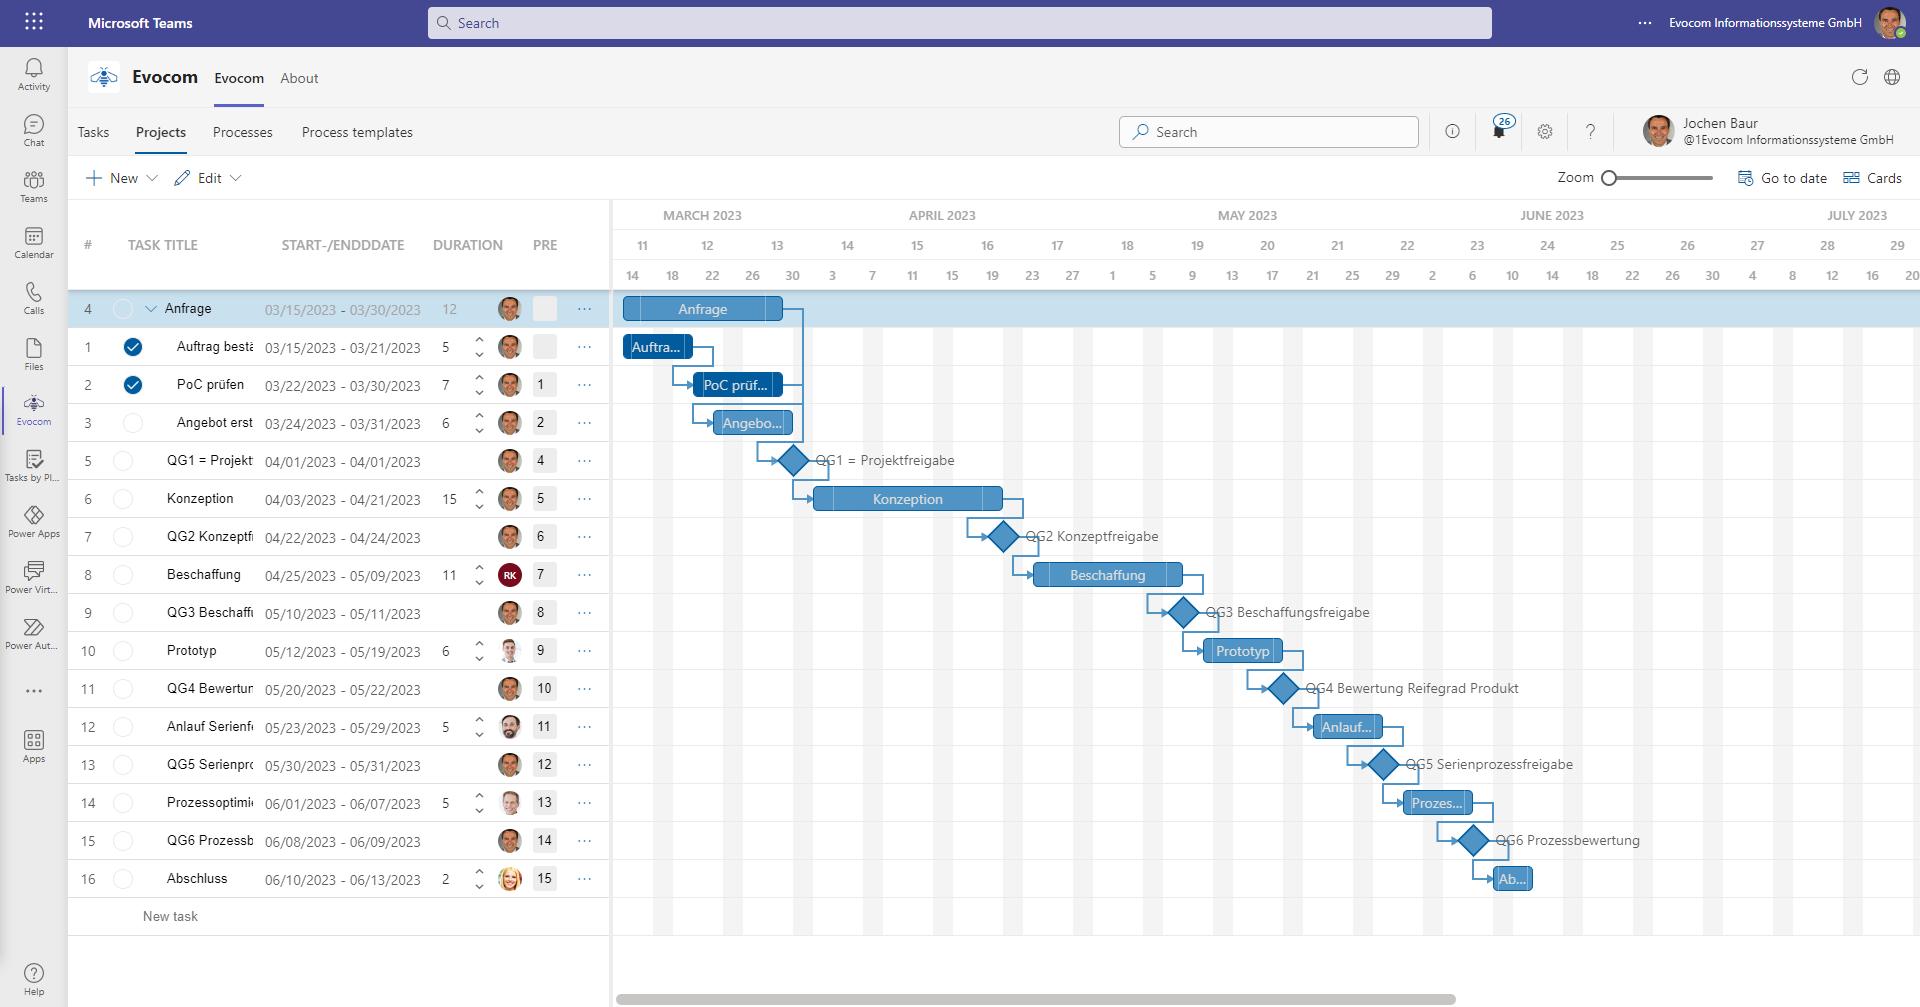 Enable project management with tasks and milestones.